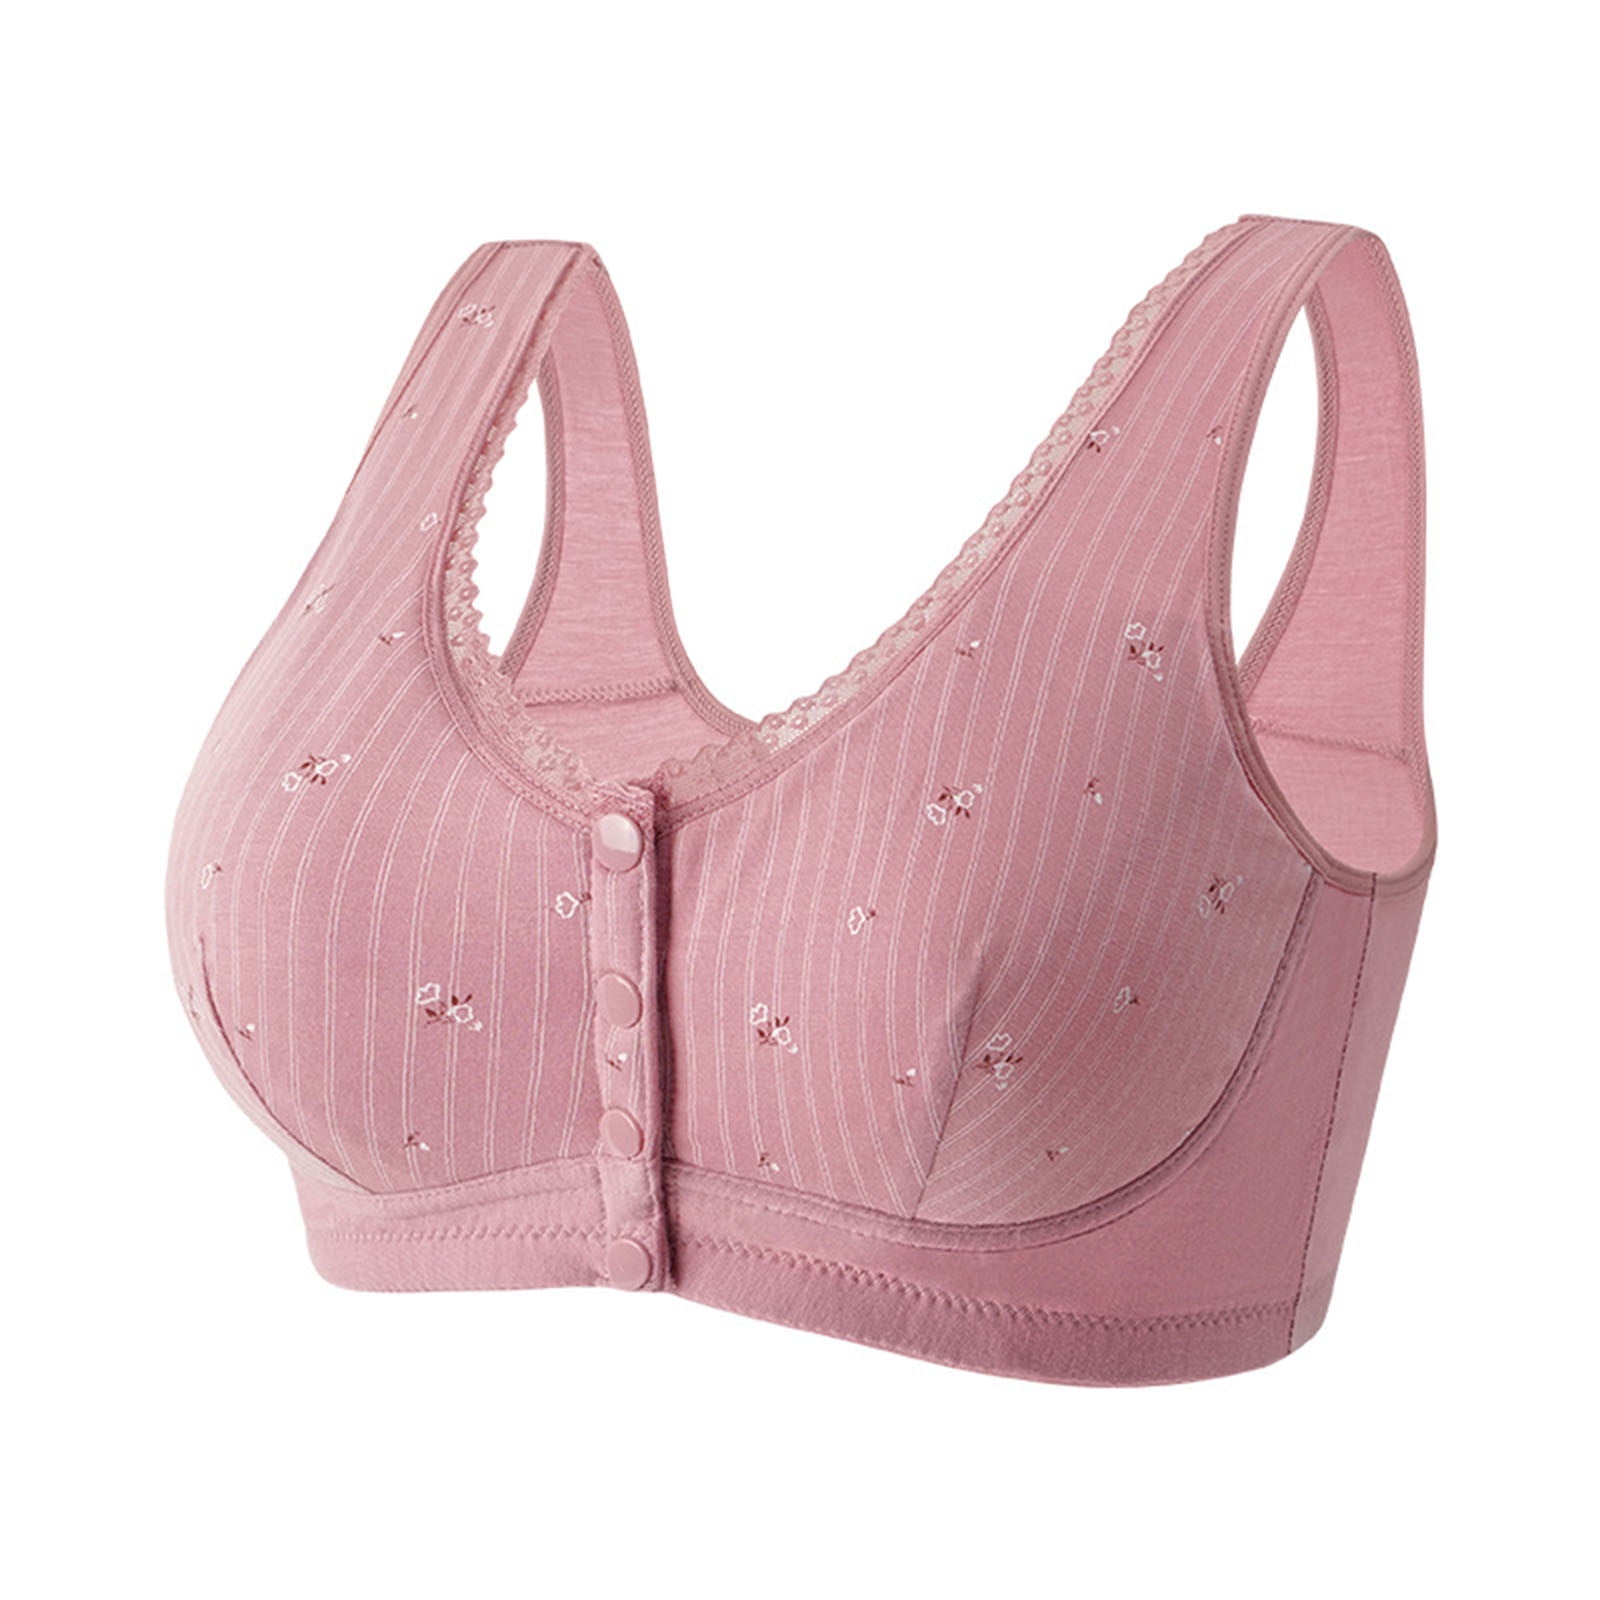 RYRJJ Clearance Daisy Bras Front Snaps Full Coverage Bras